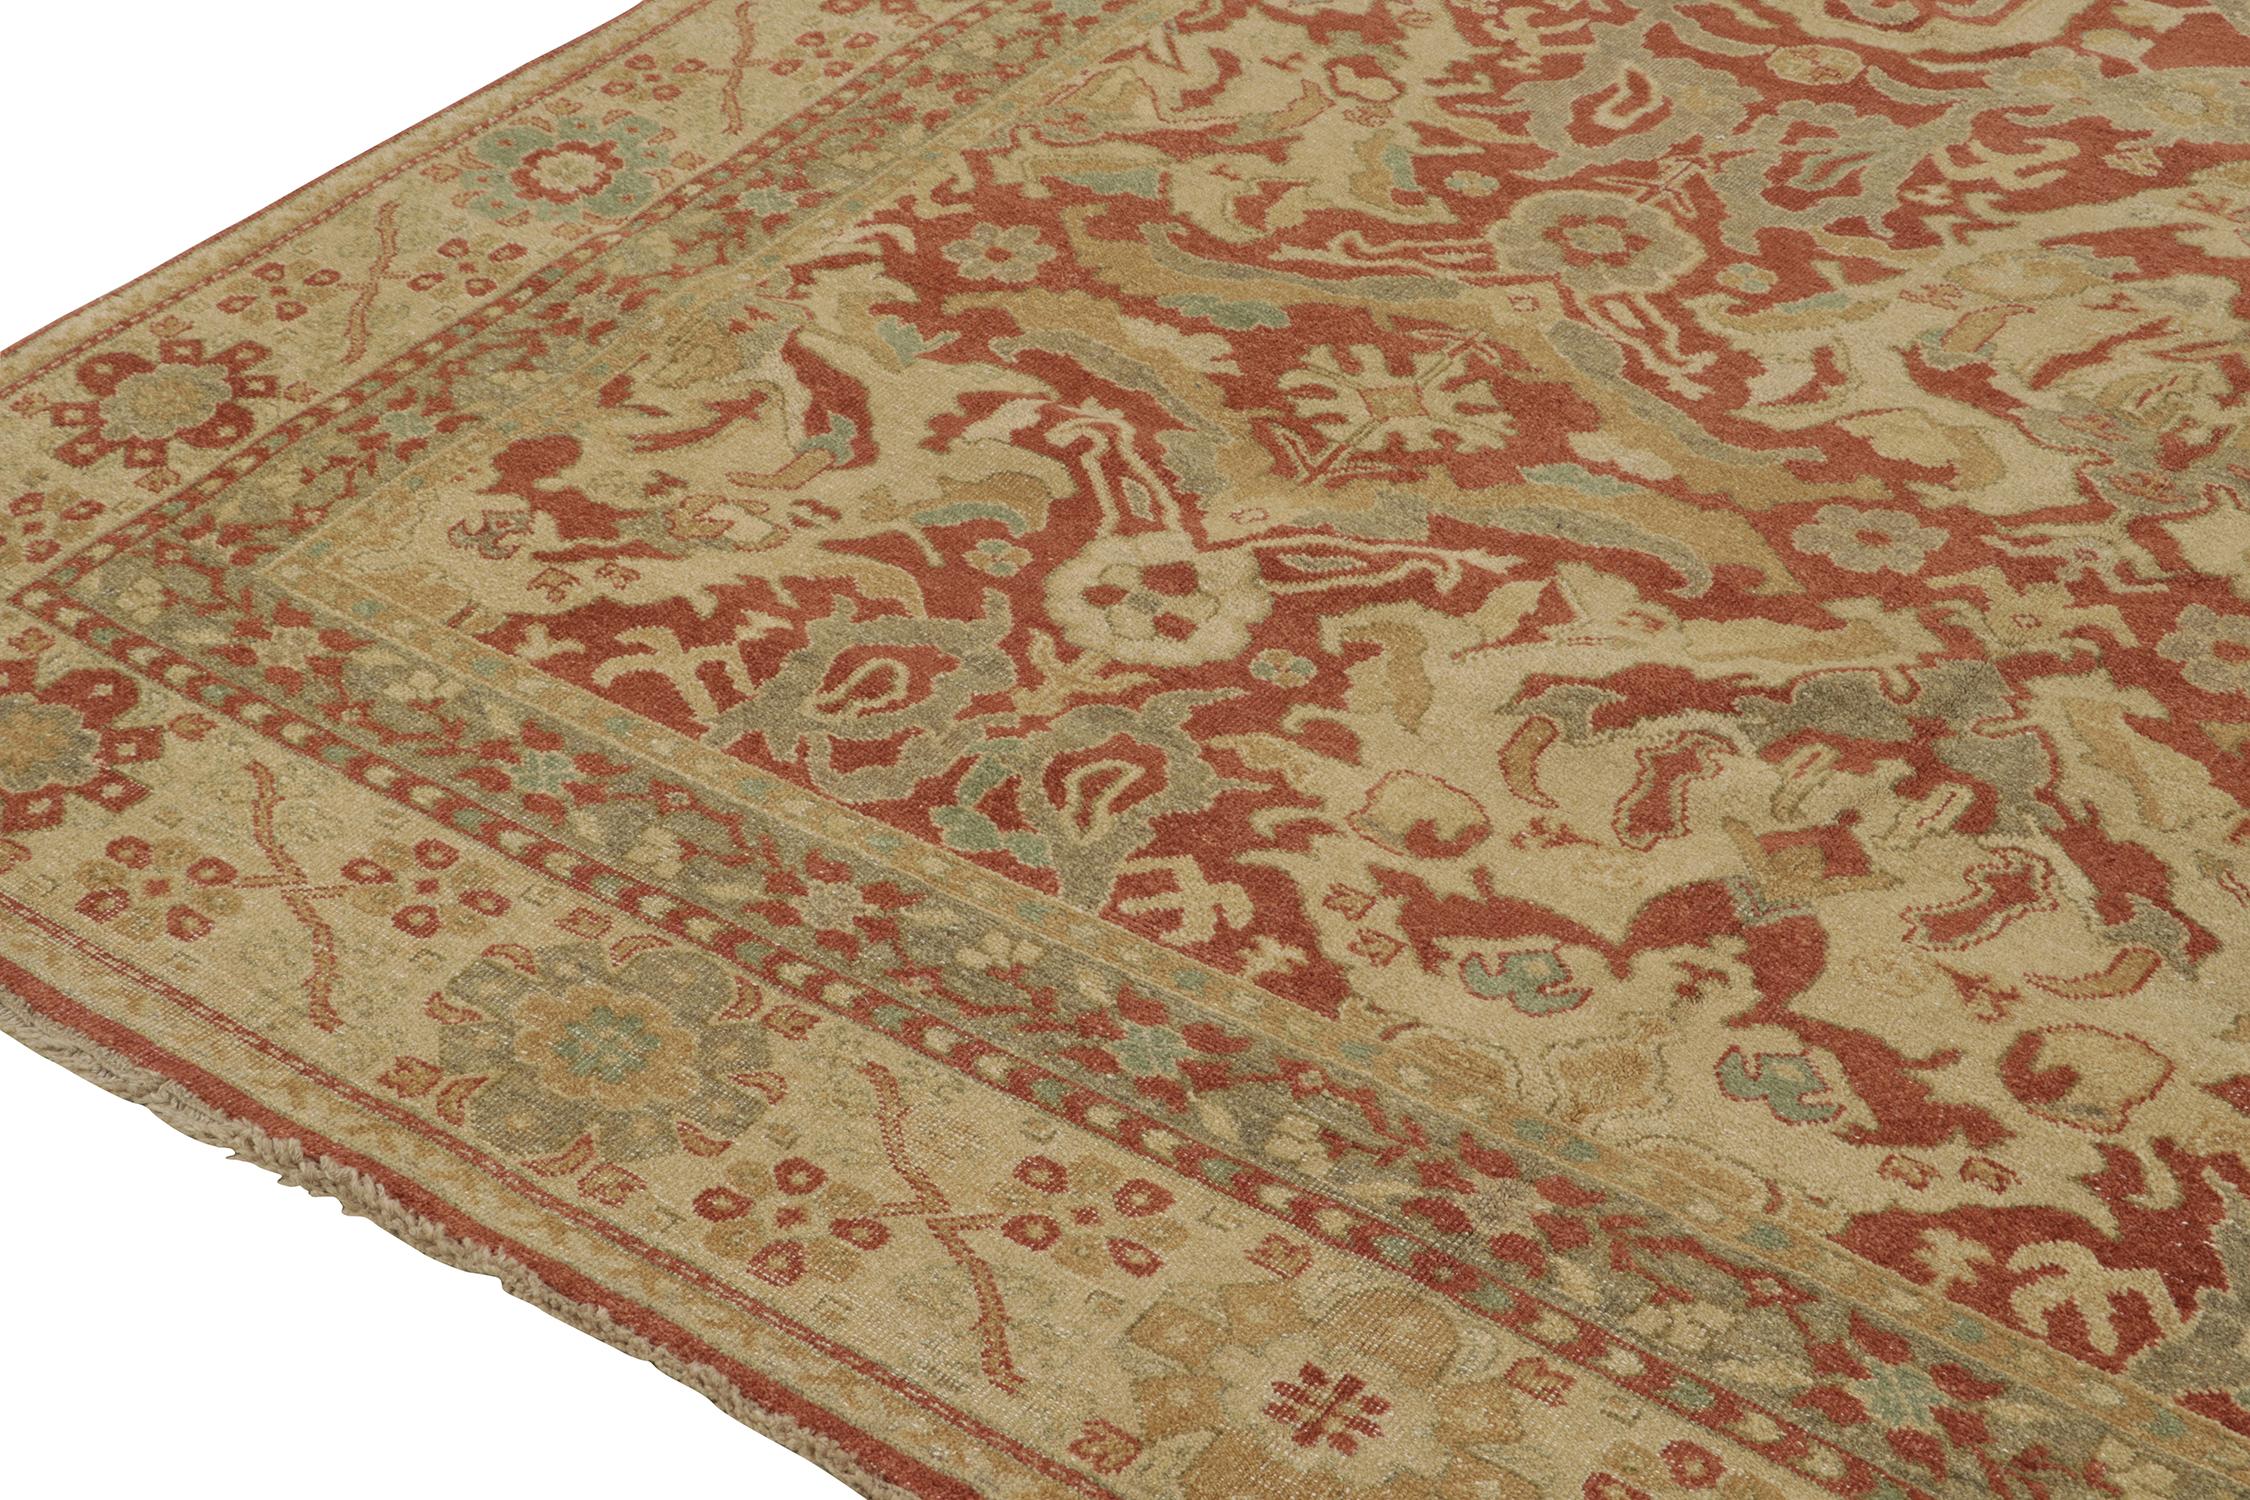 Hand-Knotted Rug & Kilim’s Oushak style Rug in Red, Beige and Gray-Blue Floral Pattern For Sale